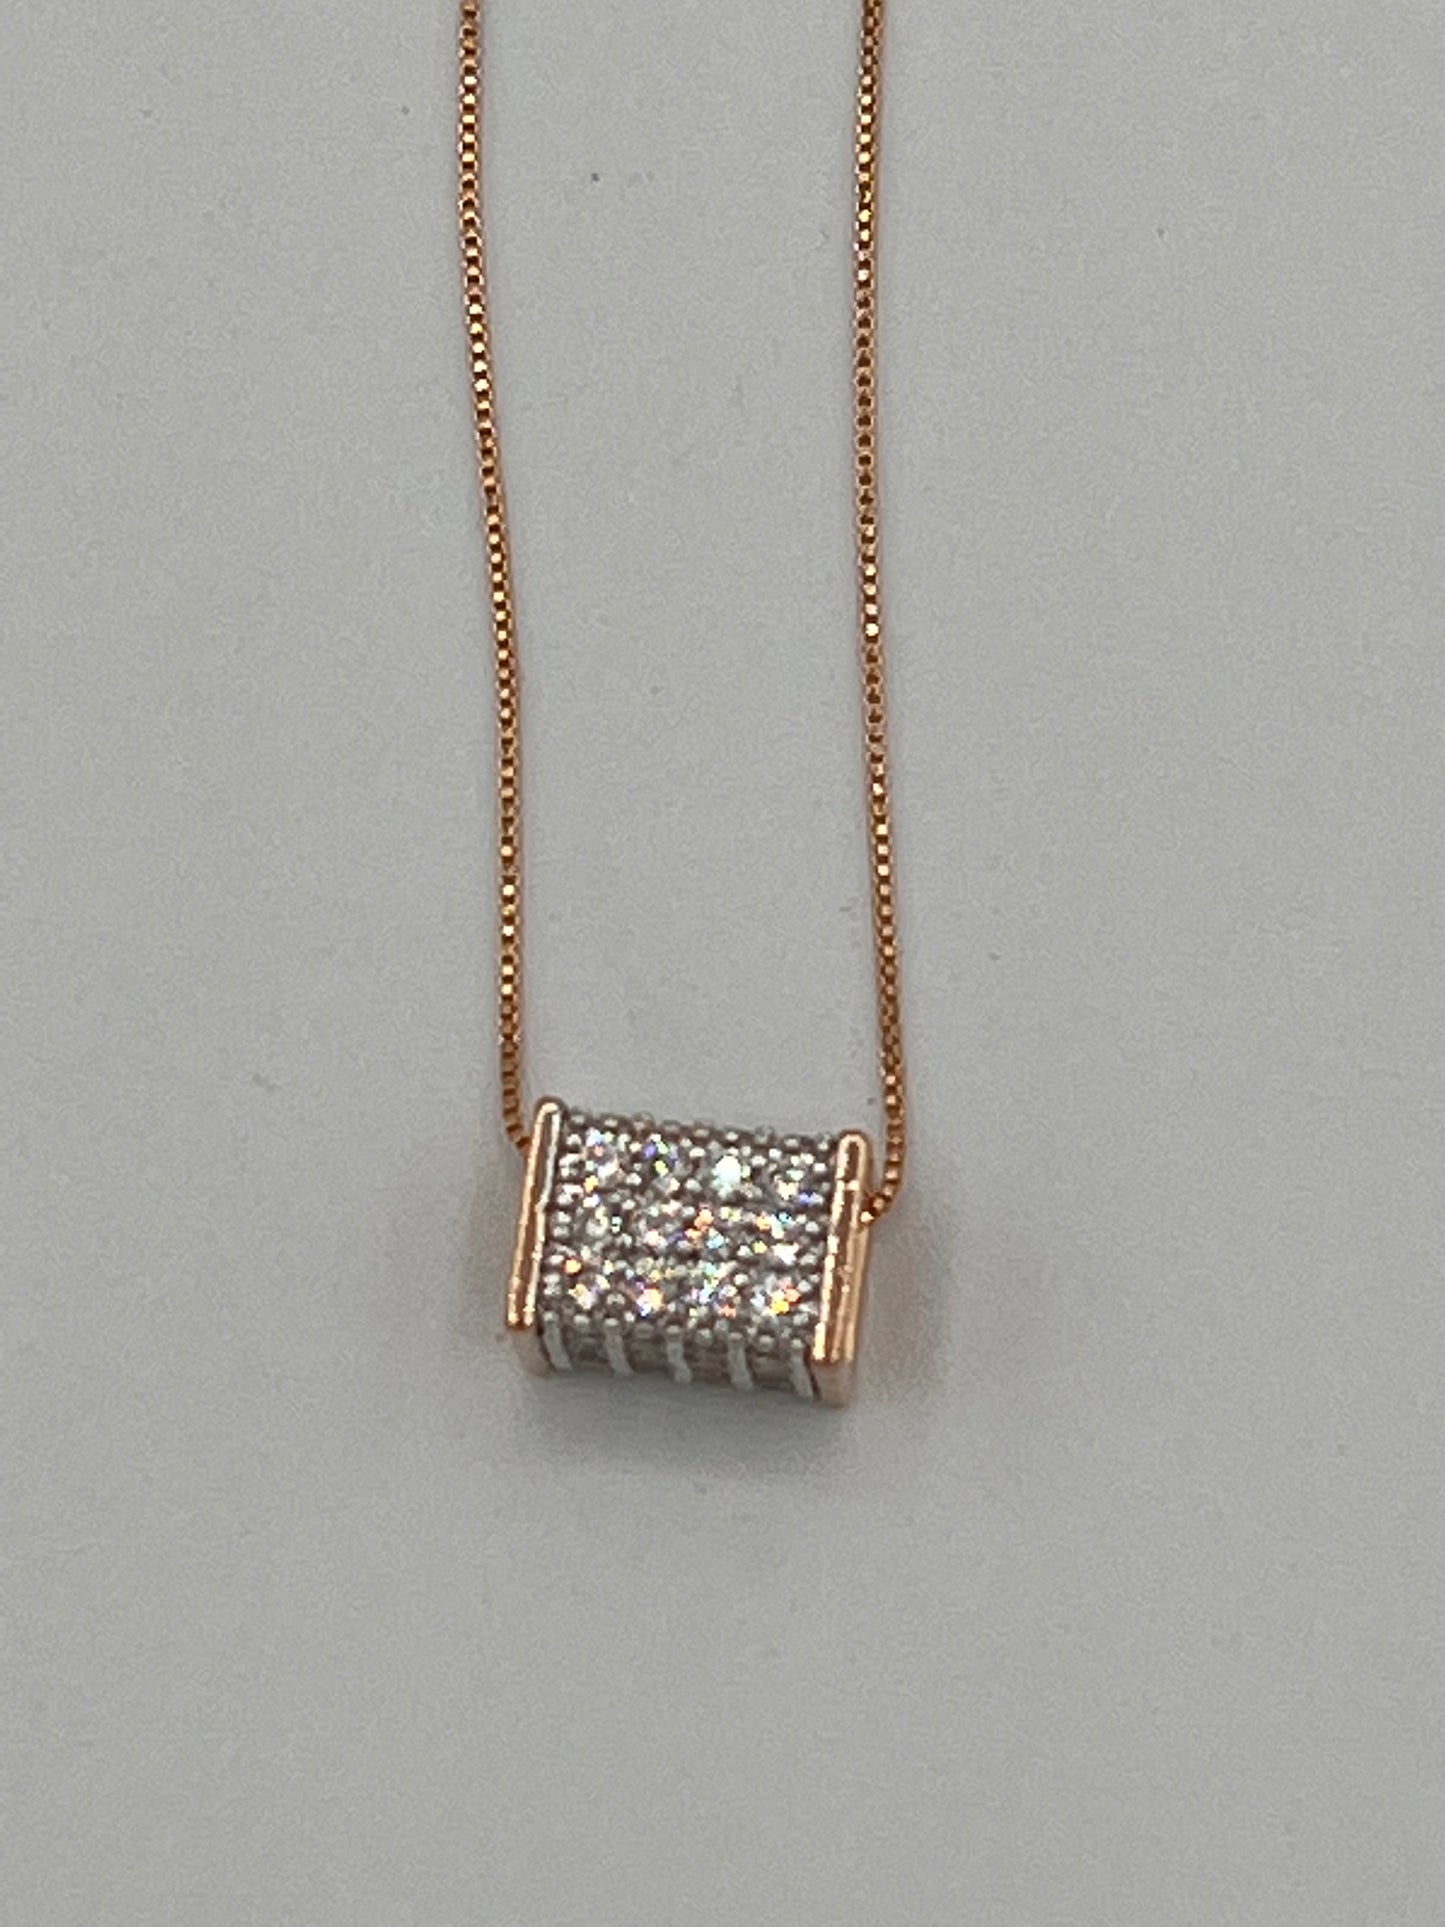 Sculpted Brilliance: 4D Pendant and Chain Gold-Plated - Timeless Elegance, Versatile Jewelry for Every Occasion